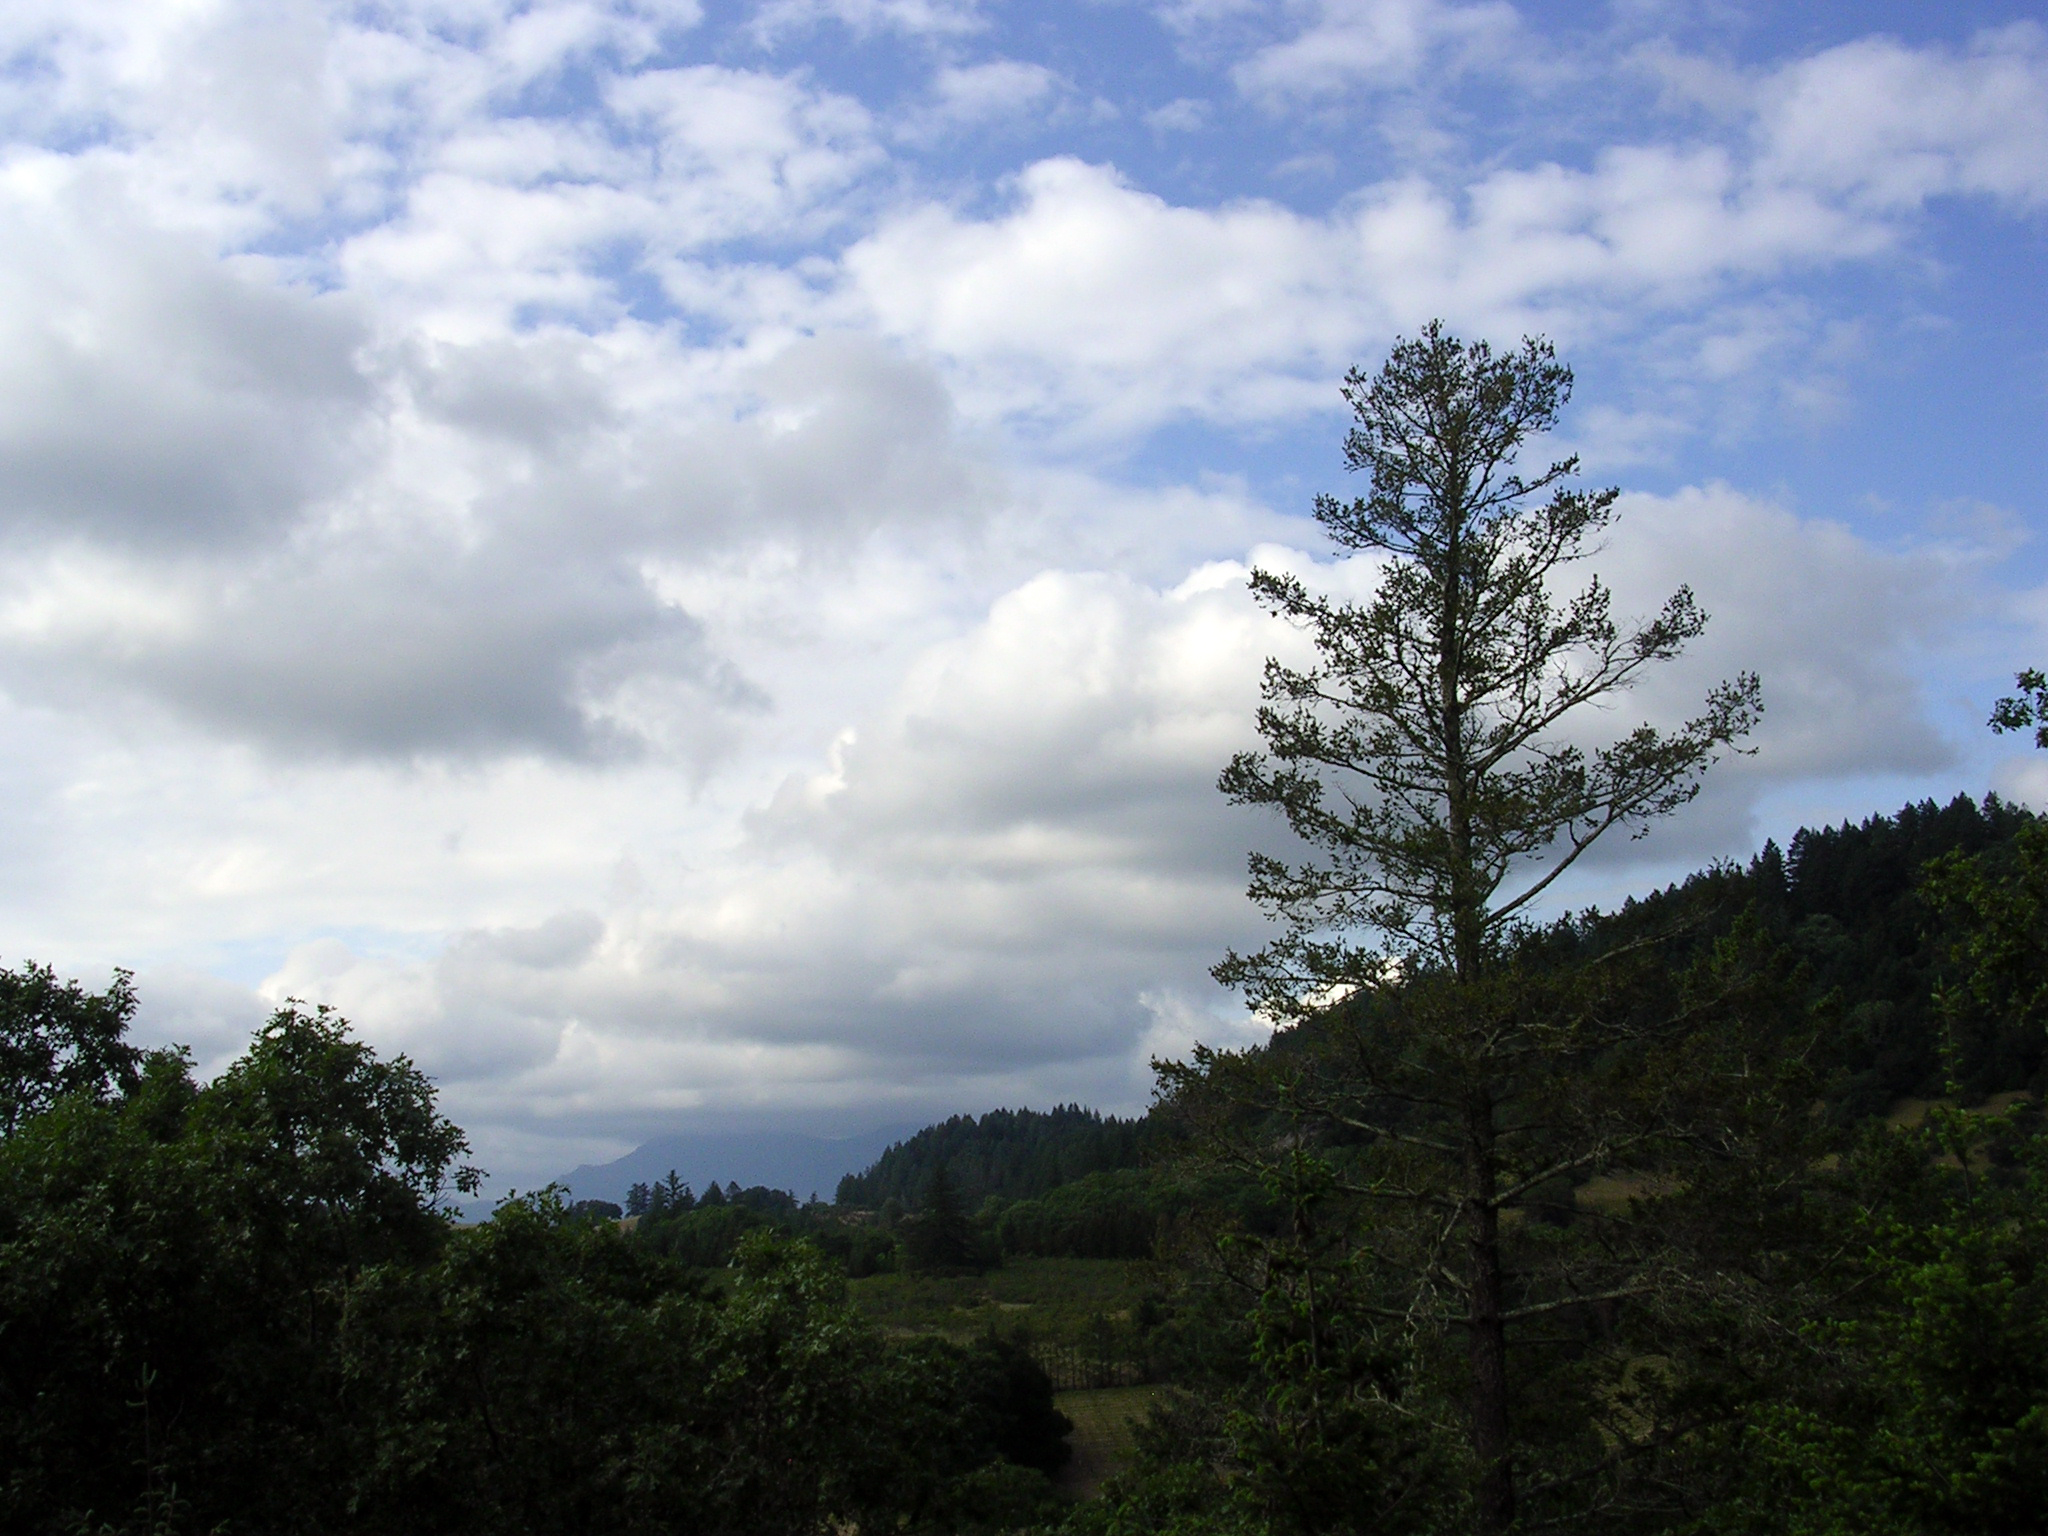 White clouds against a blue sky with trees in foreground